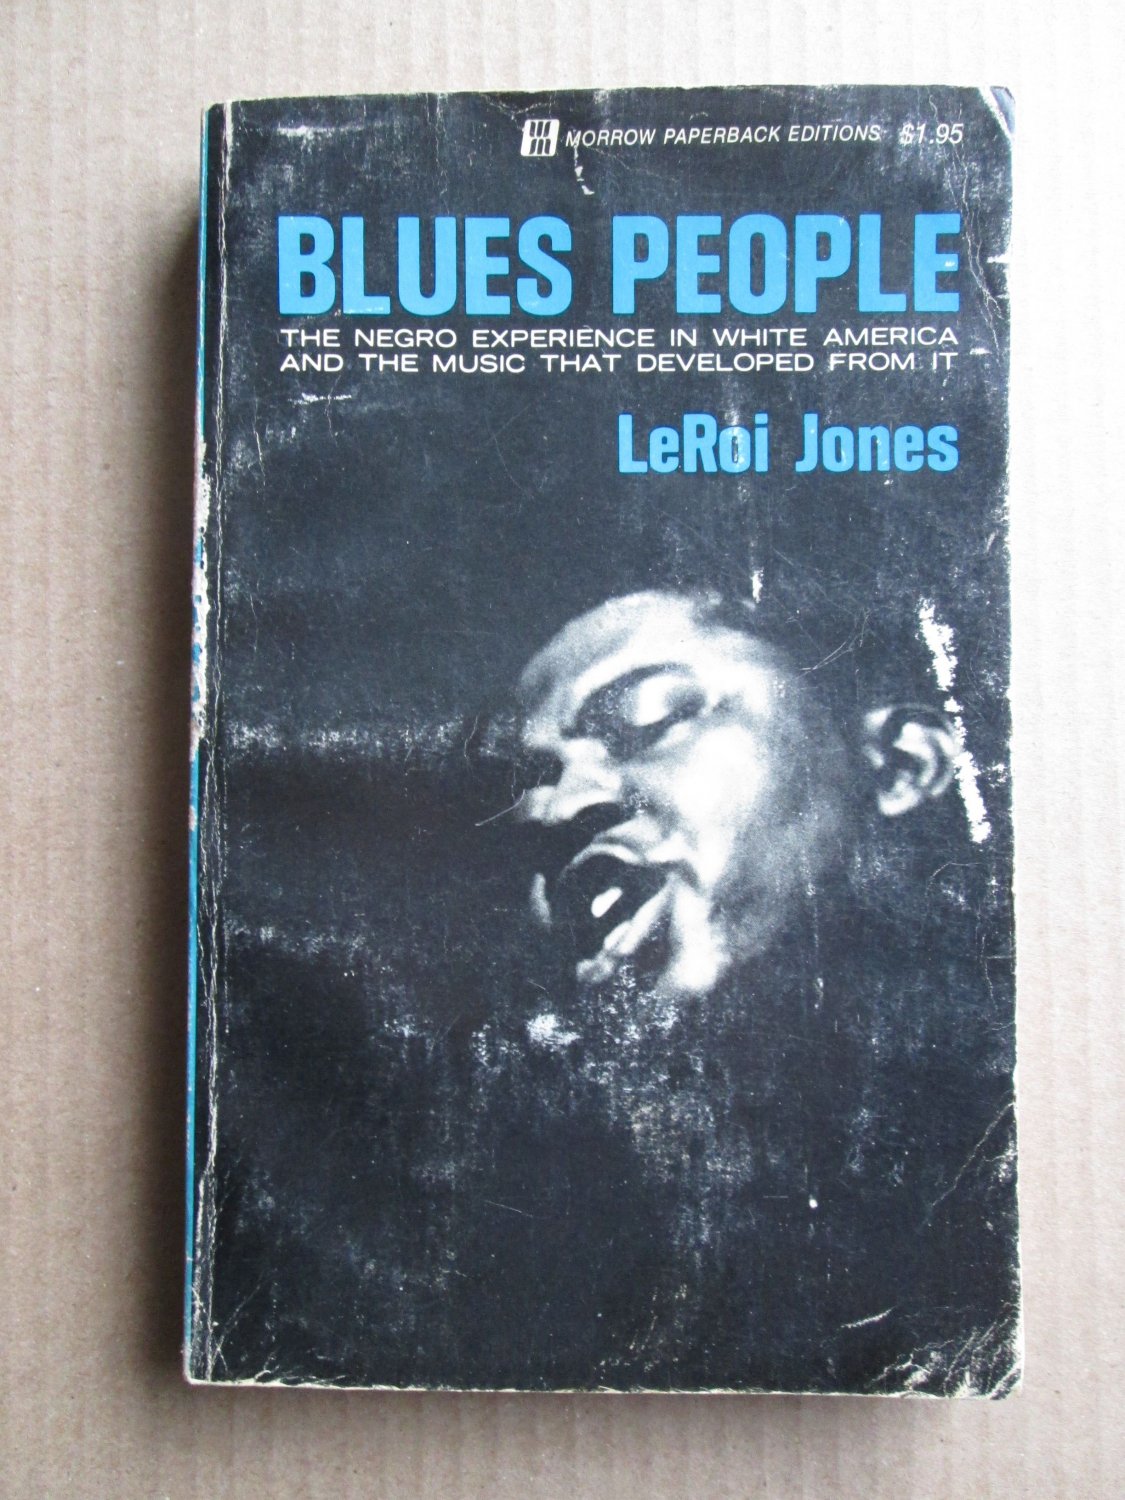 Blues People: The Negro Experience in White America by Leroi Jones William Morrow and Co 1972 12th